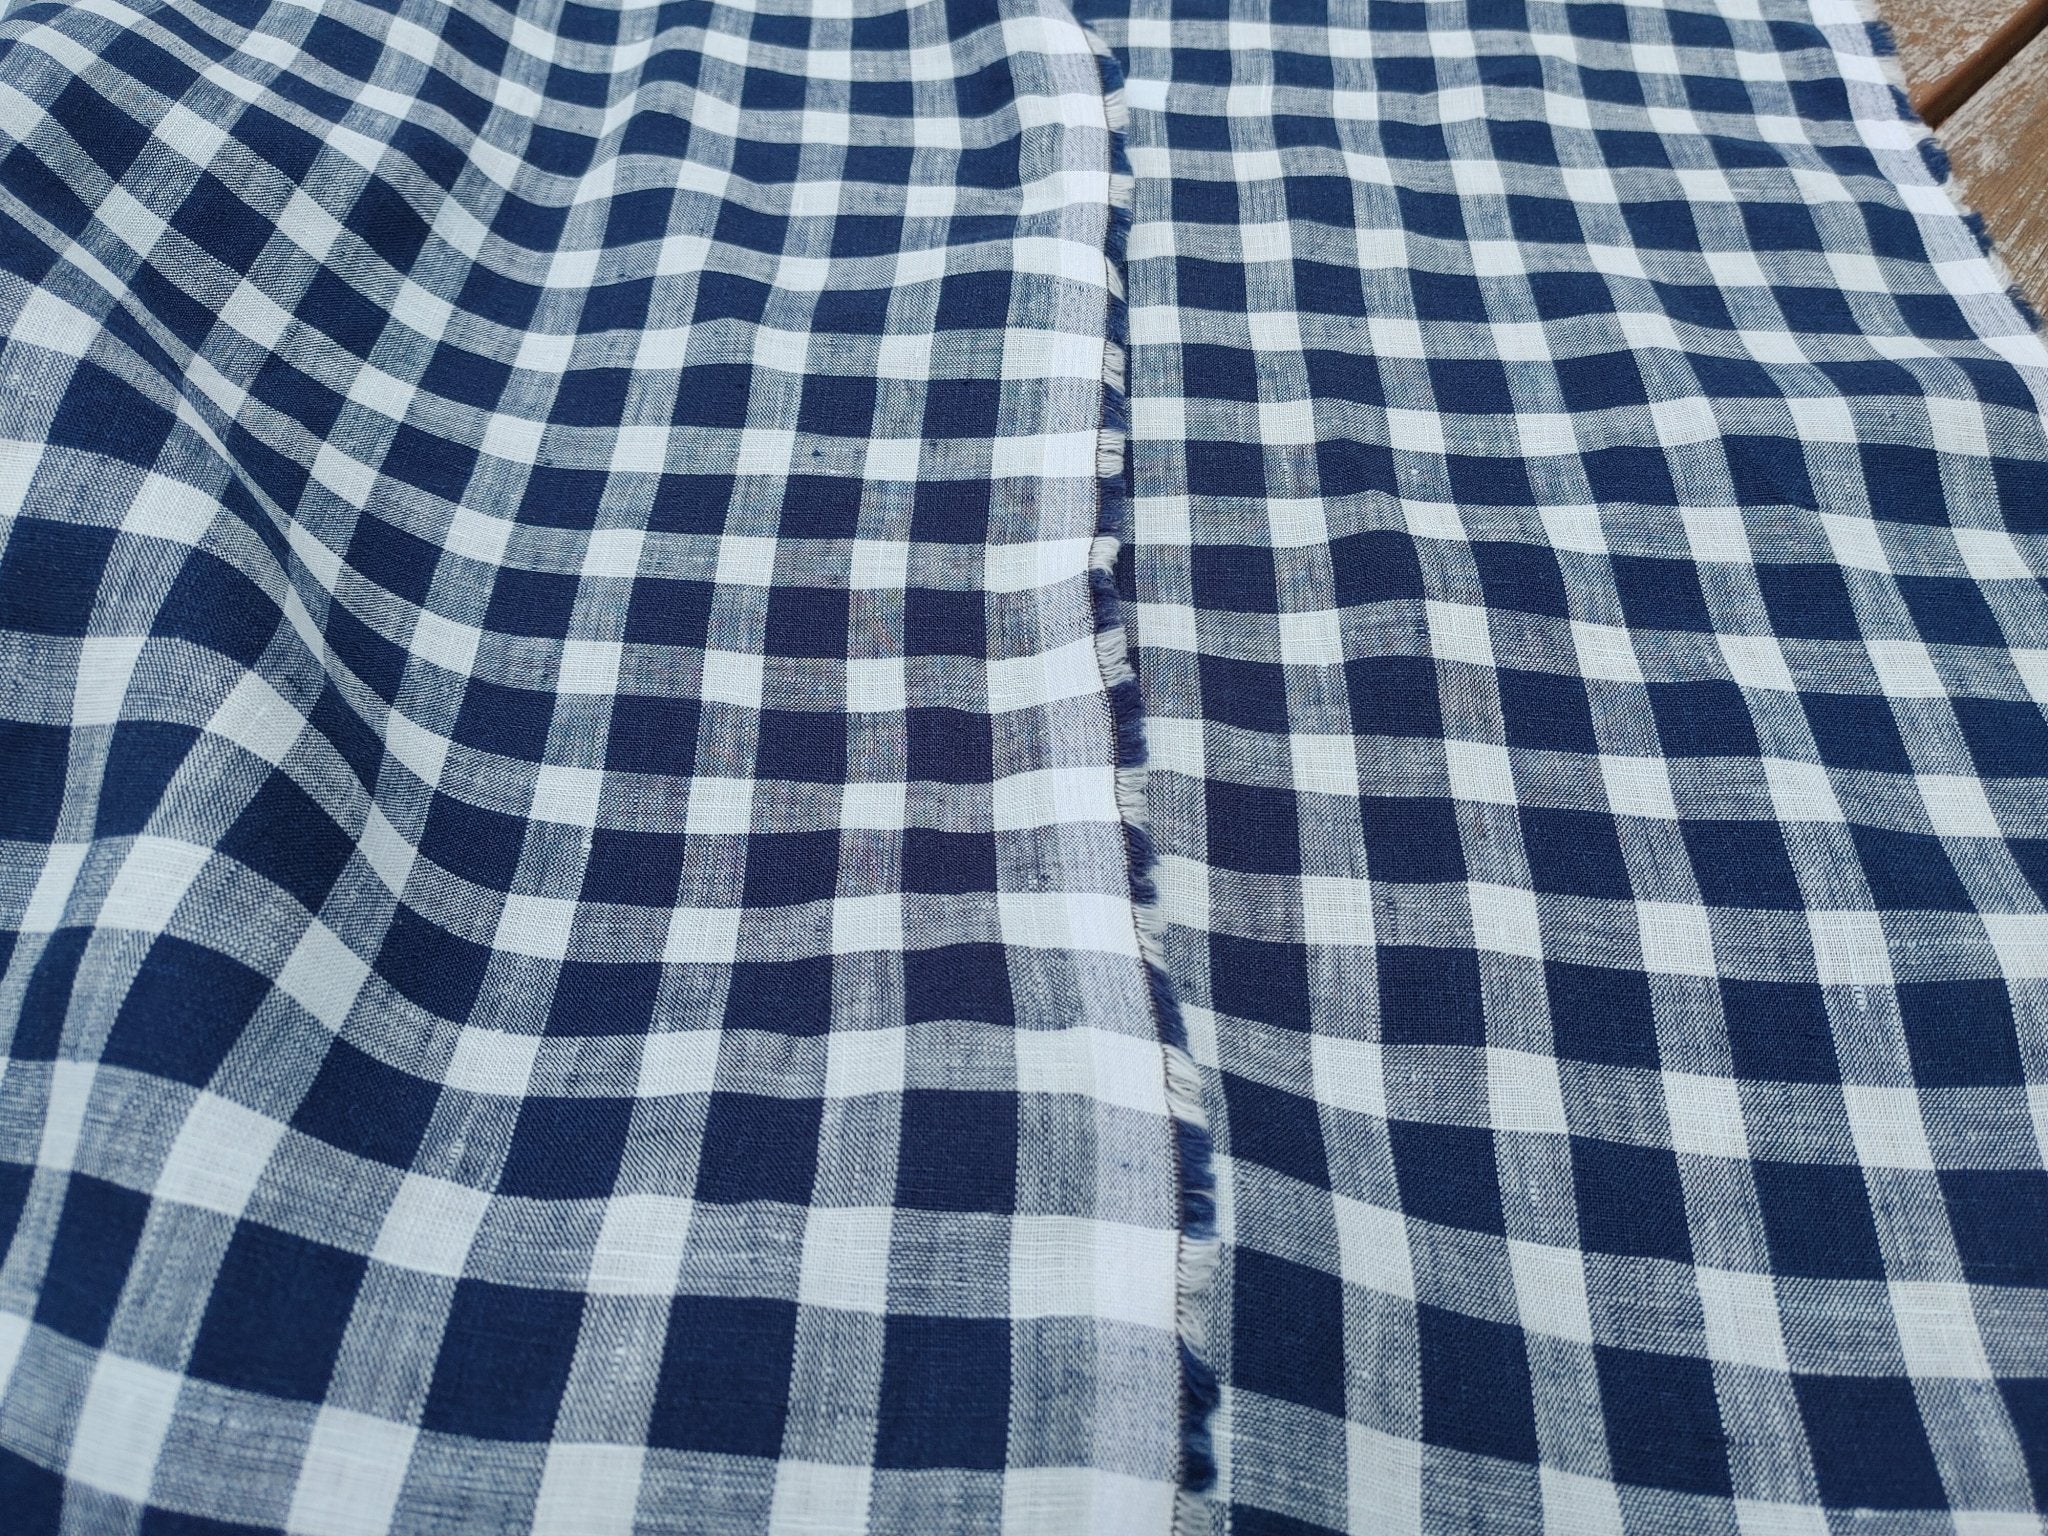 100% Linen Navy Modified Gingham Check Fabric – Lightweight and Timelessly Chic 4407 - The Linen Lab - Navy